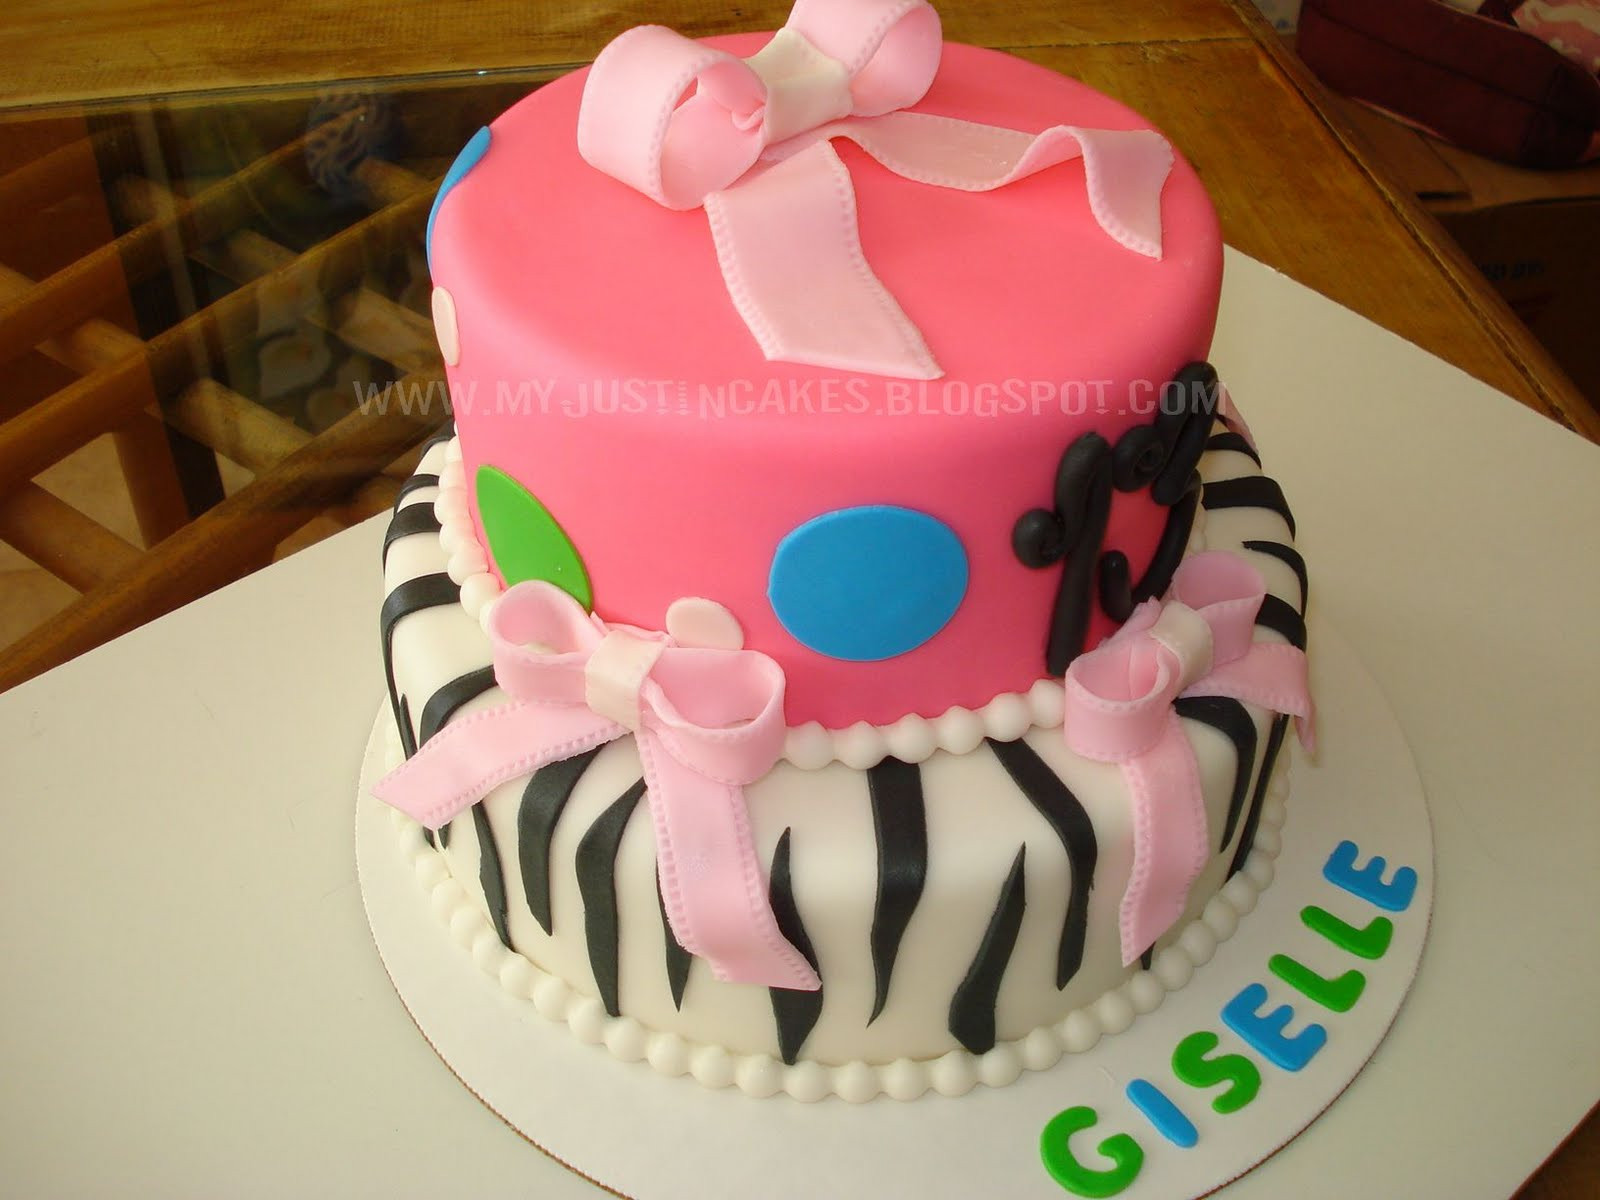 Best ideas about 13 Year Old Girl Birthday Cake
. Save or Pin Just in Cakes 13 Year Old Girl Birthday Cake Now.